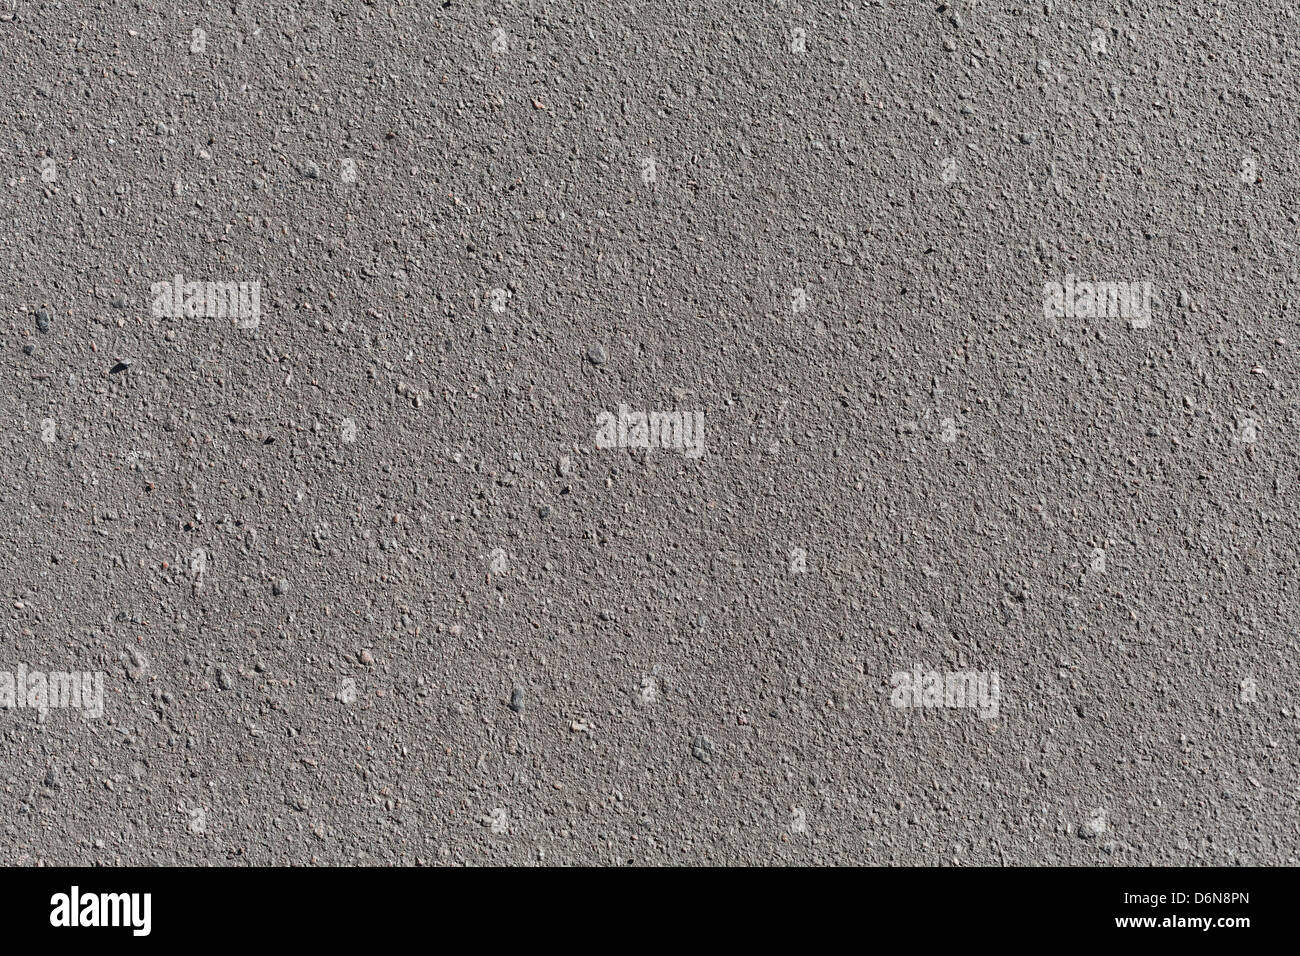 Close-up background texture of an asphalt road surface Stock Photo